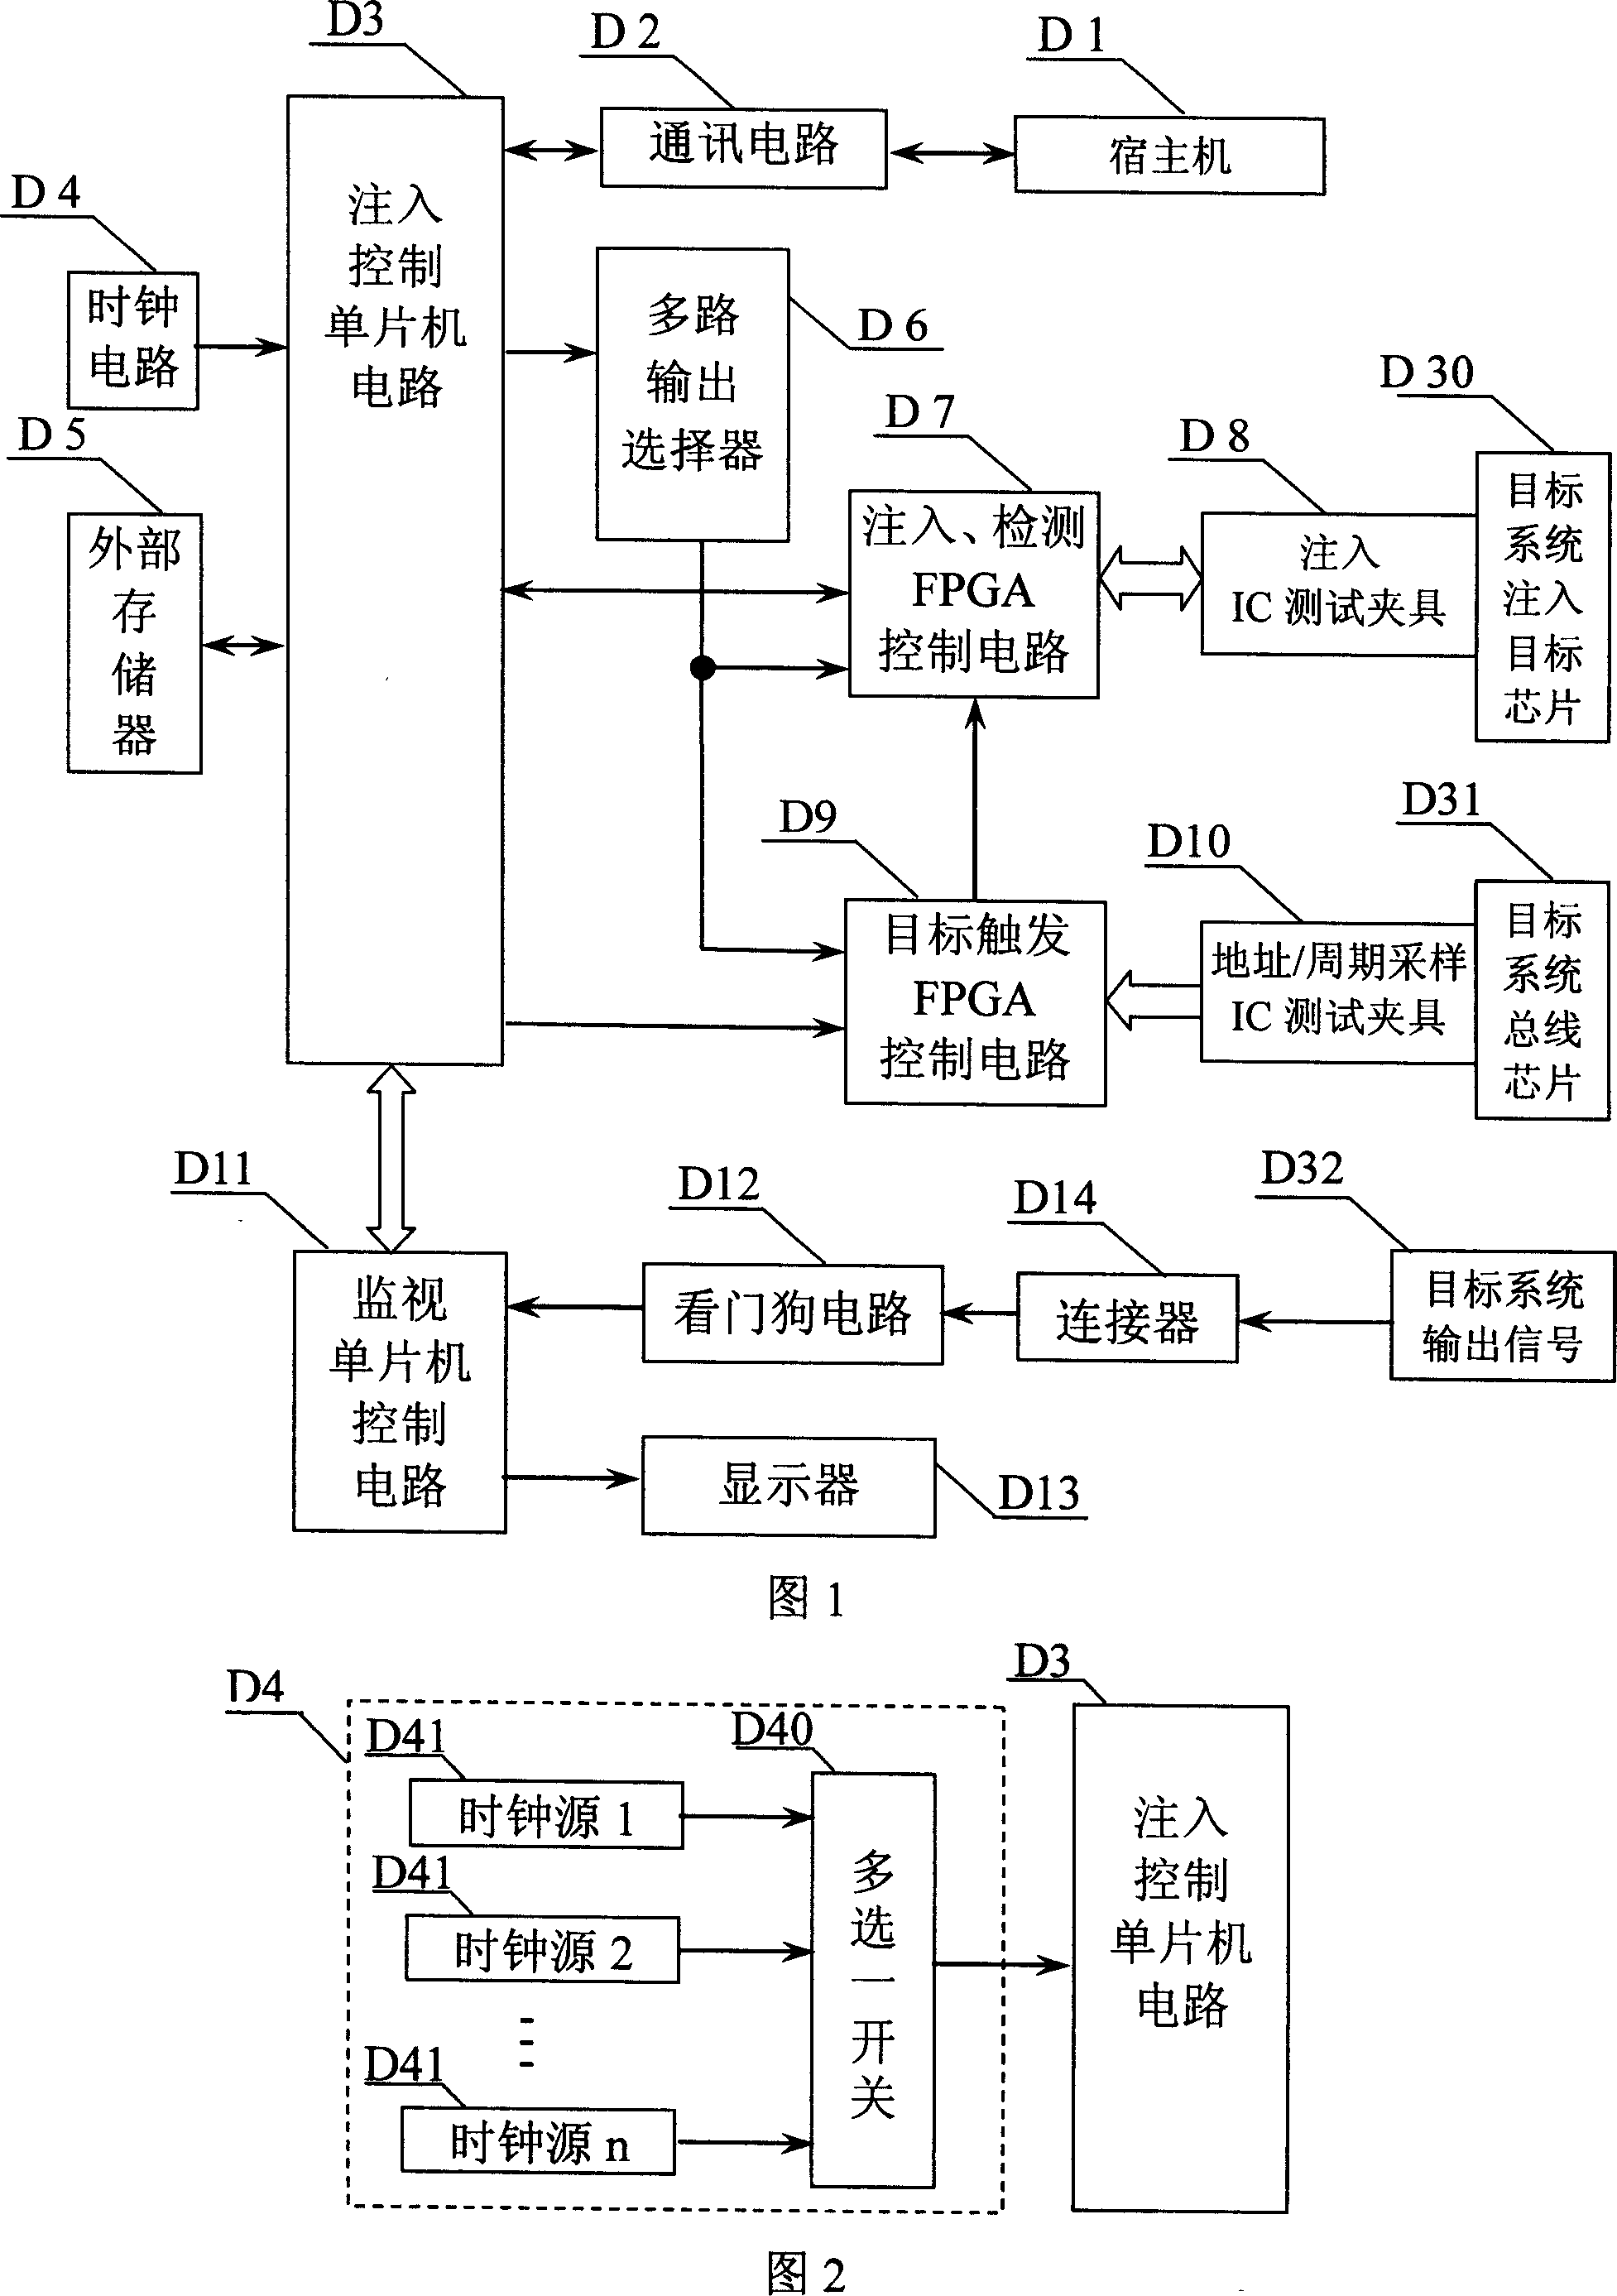 Bridging type fault injection apparatus and method of fault-tolerant computer system